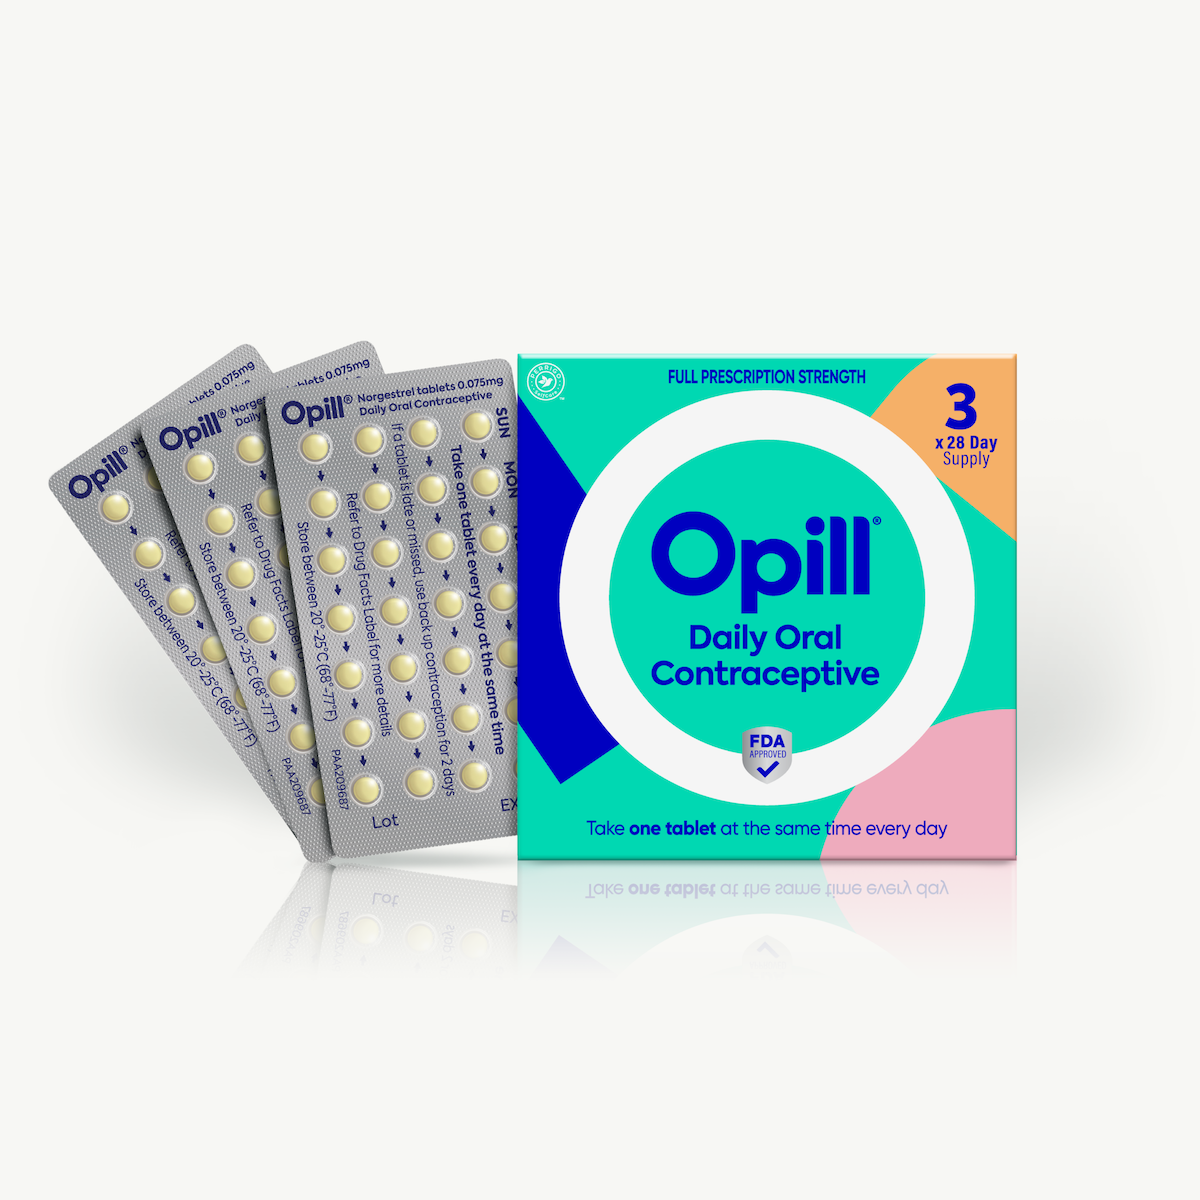 Opill®, Daily Oral Contraceptive Pill, 3-pack (84 tablets)